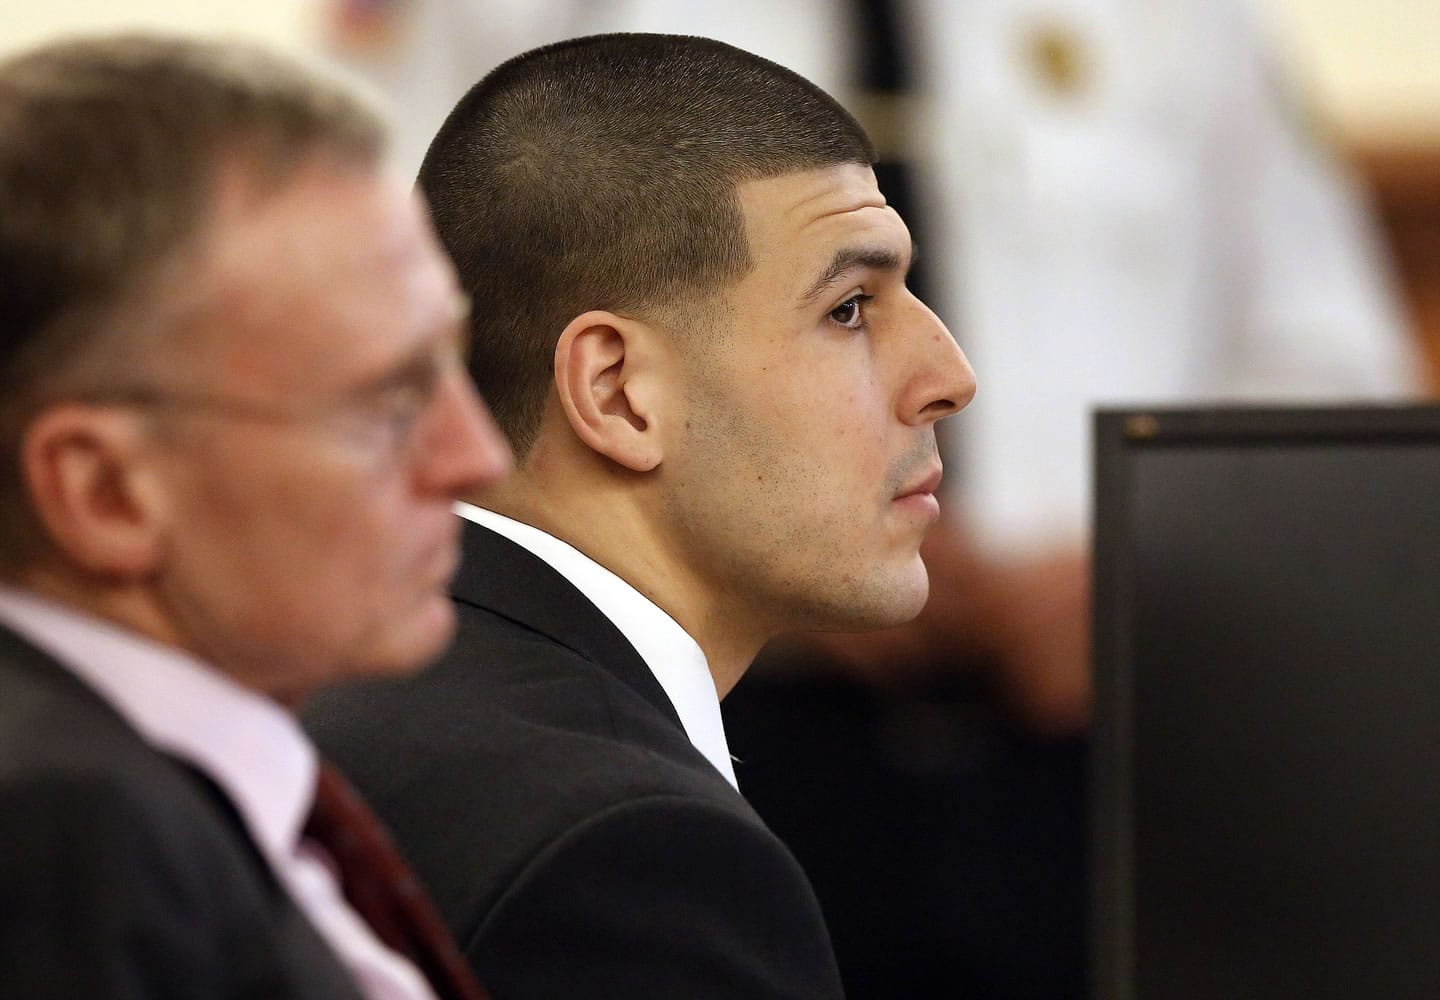 Former New England Patriots football player Aaron Hernandez, right, listens during his murder trial as defense attorney Charles Rankin, left, looks on Thursday in Fall River, Mass.